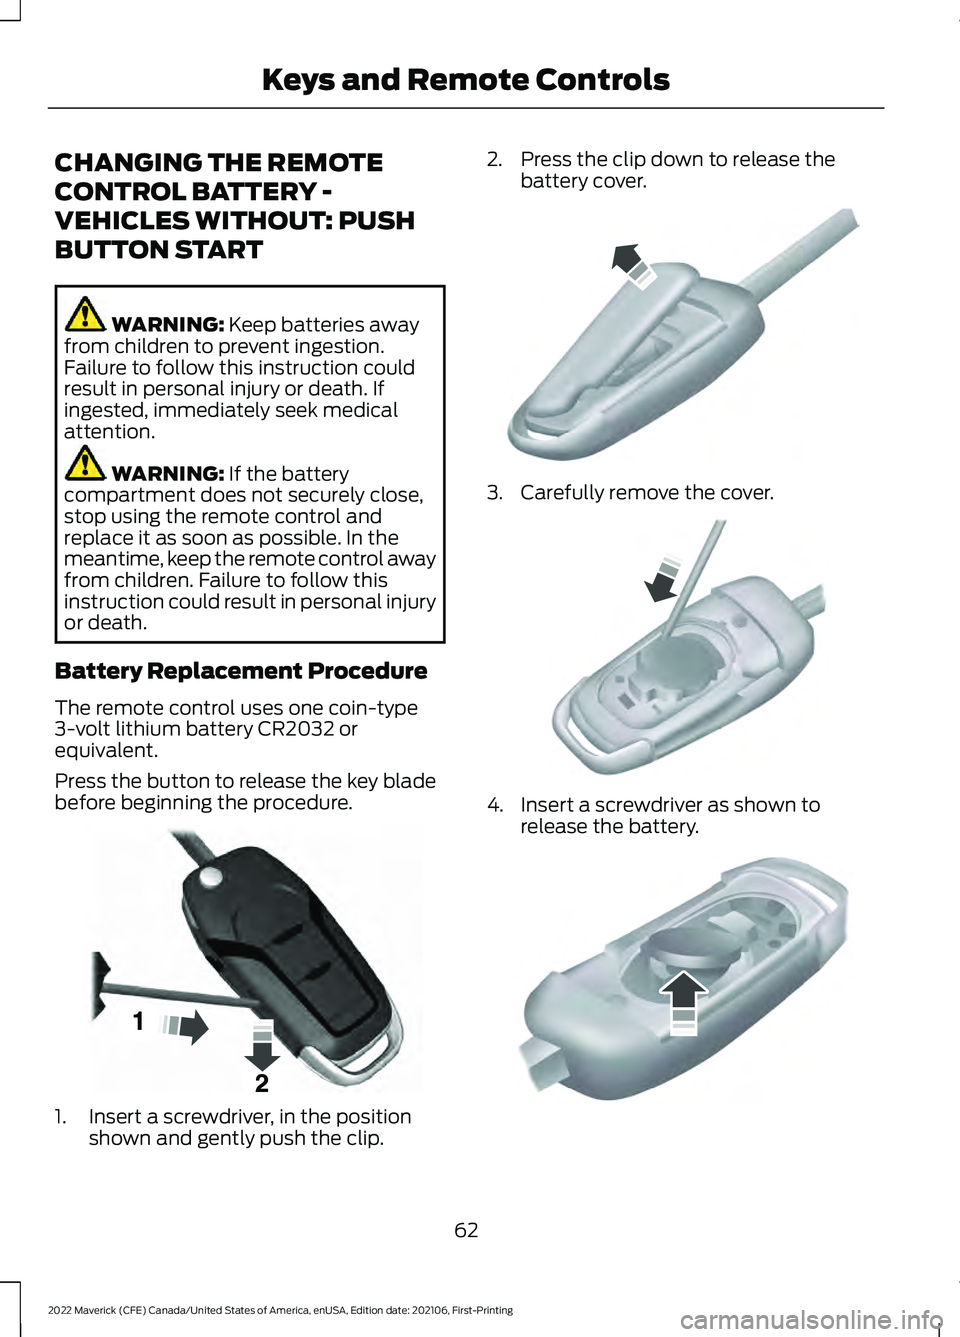 FORD MAVERICK 2022  Owners Manual CHANGING THE REMOTE
CONTROL BATTERY -
VEHICLES WITHOUT: PUSH
BUTTON START
WARNING: Keep batteries away
from children to prevent ingestion.
Failure to follow this instruction could
result in personal i